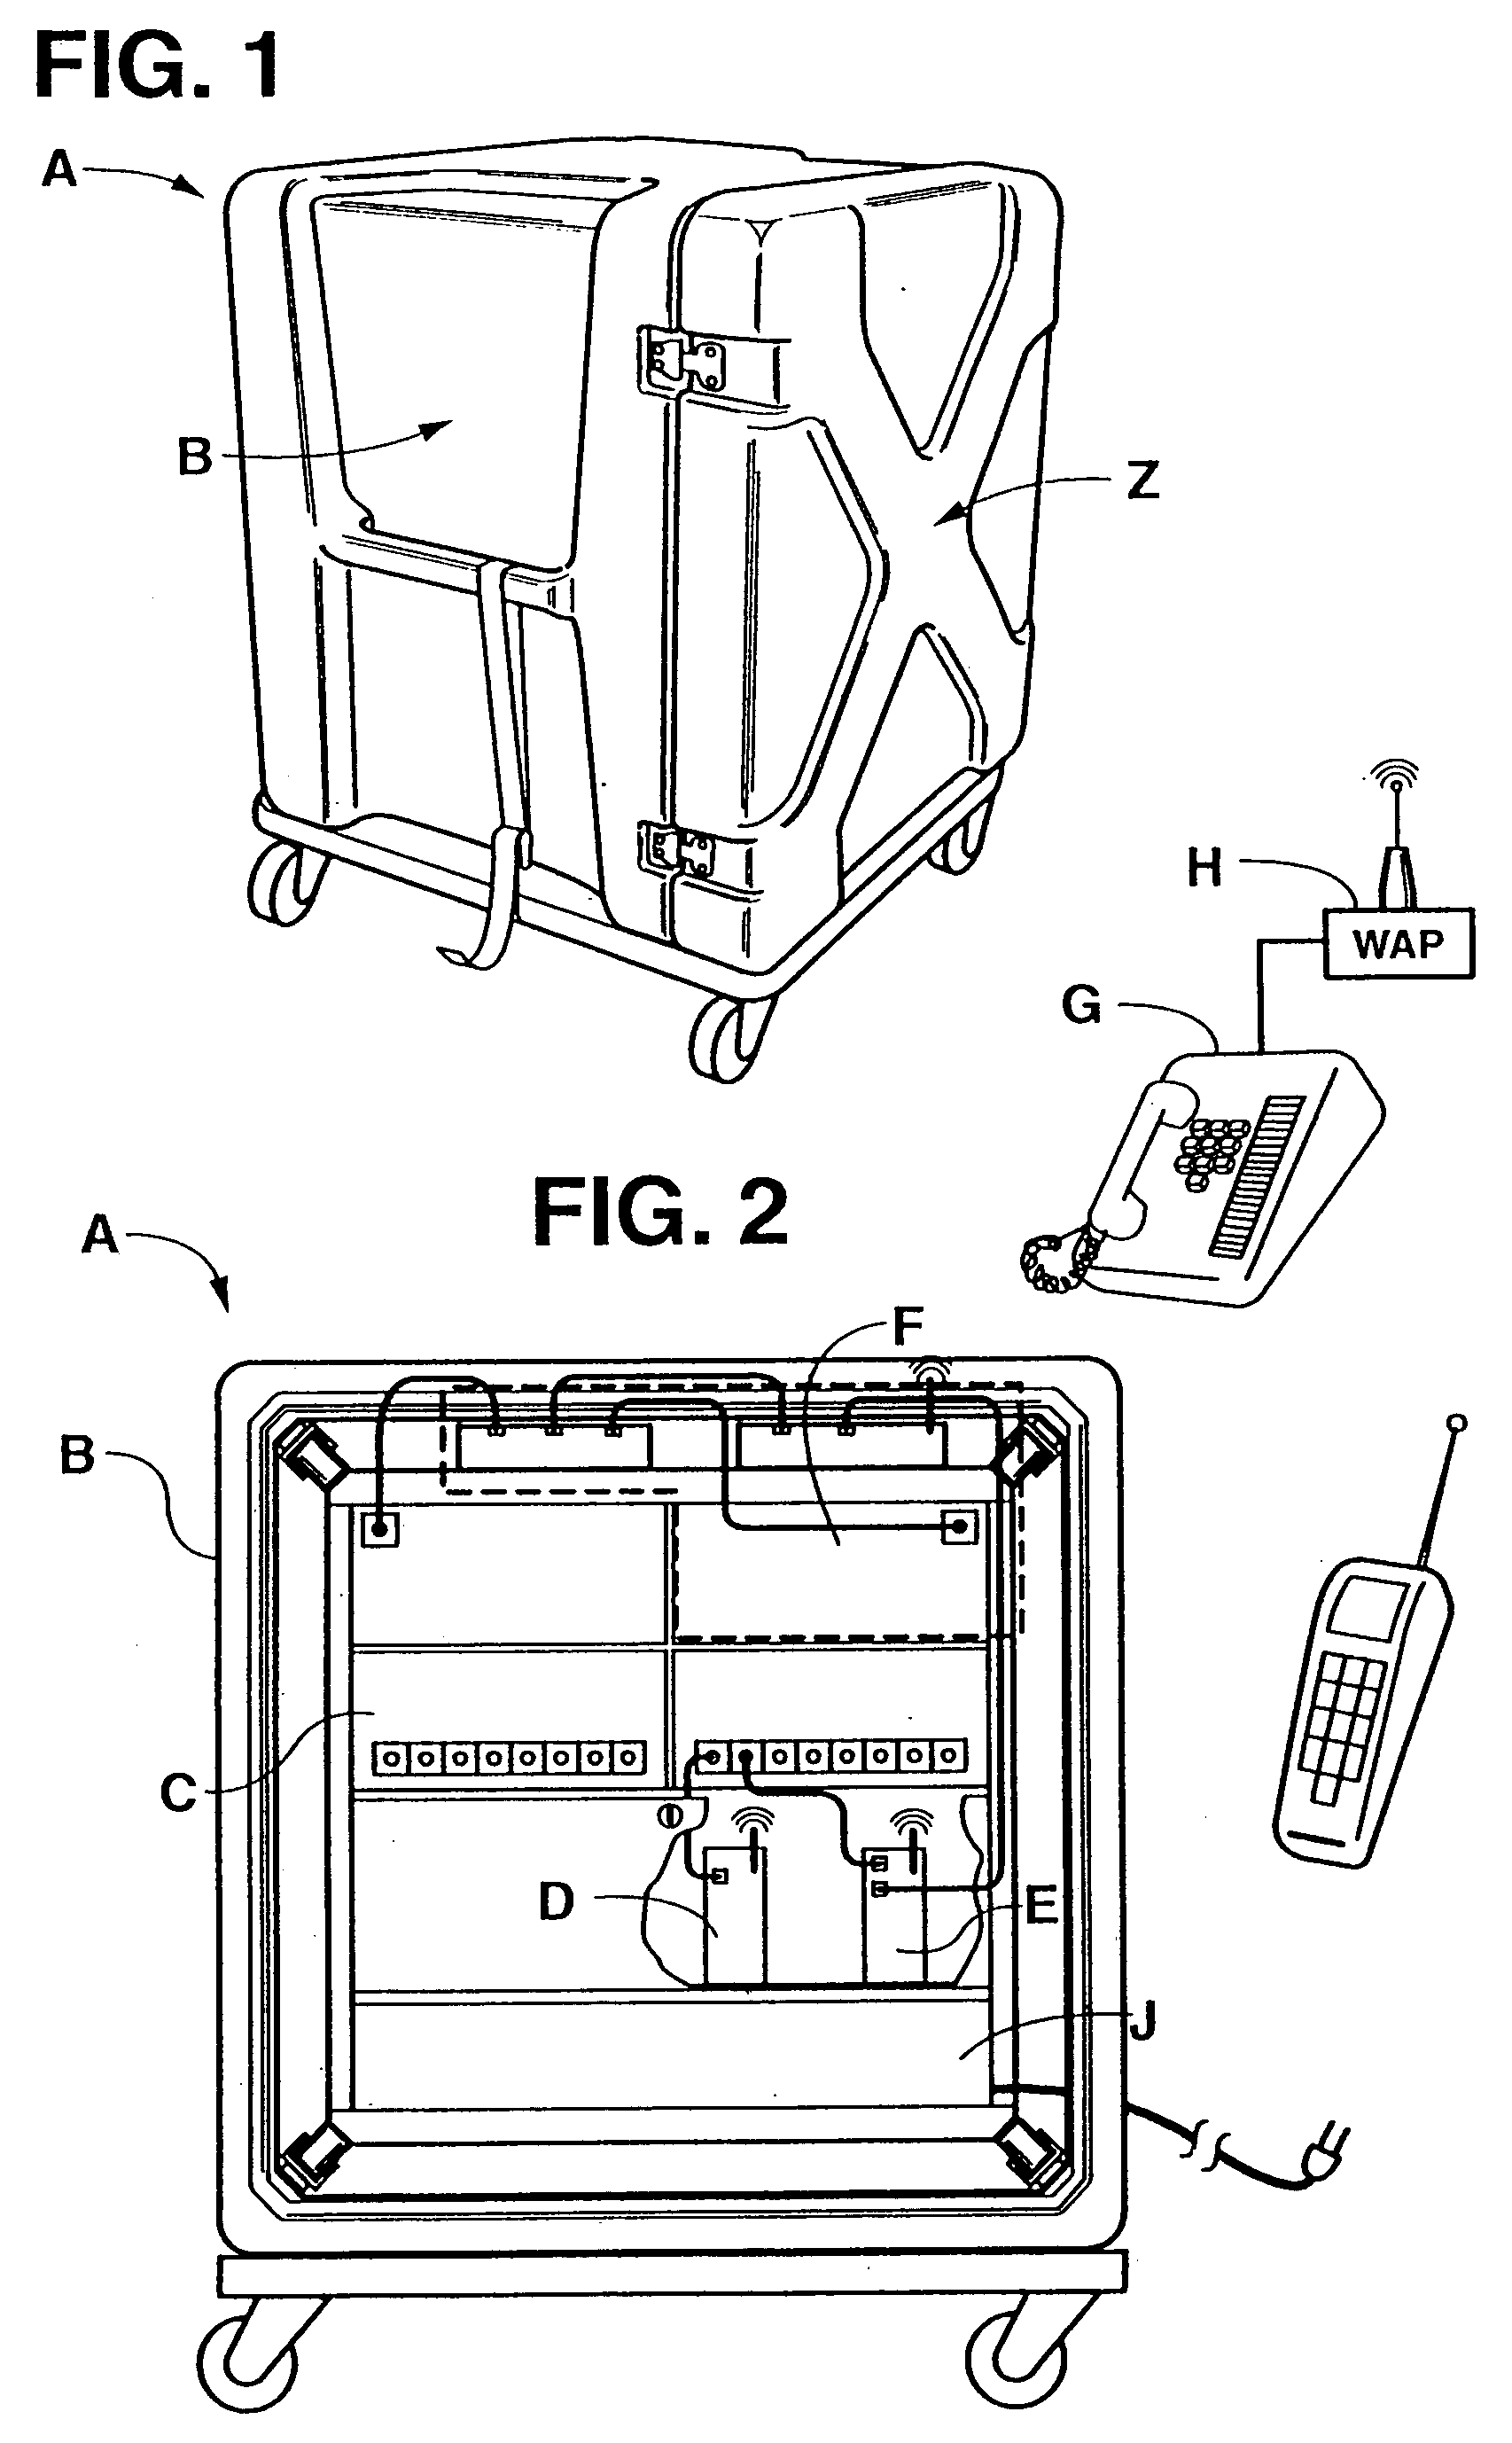 Full service mobile wireless telecommunication system and method